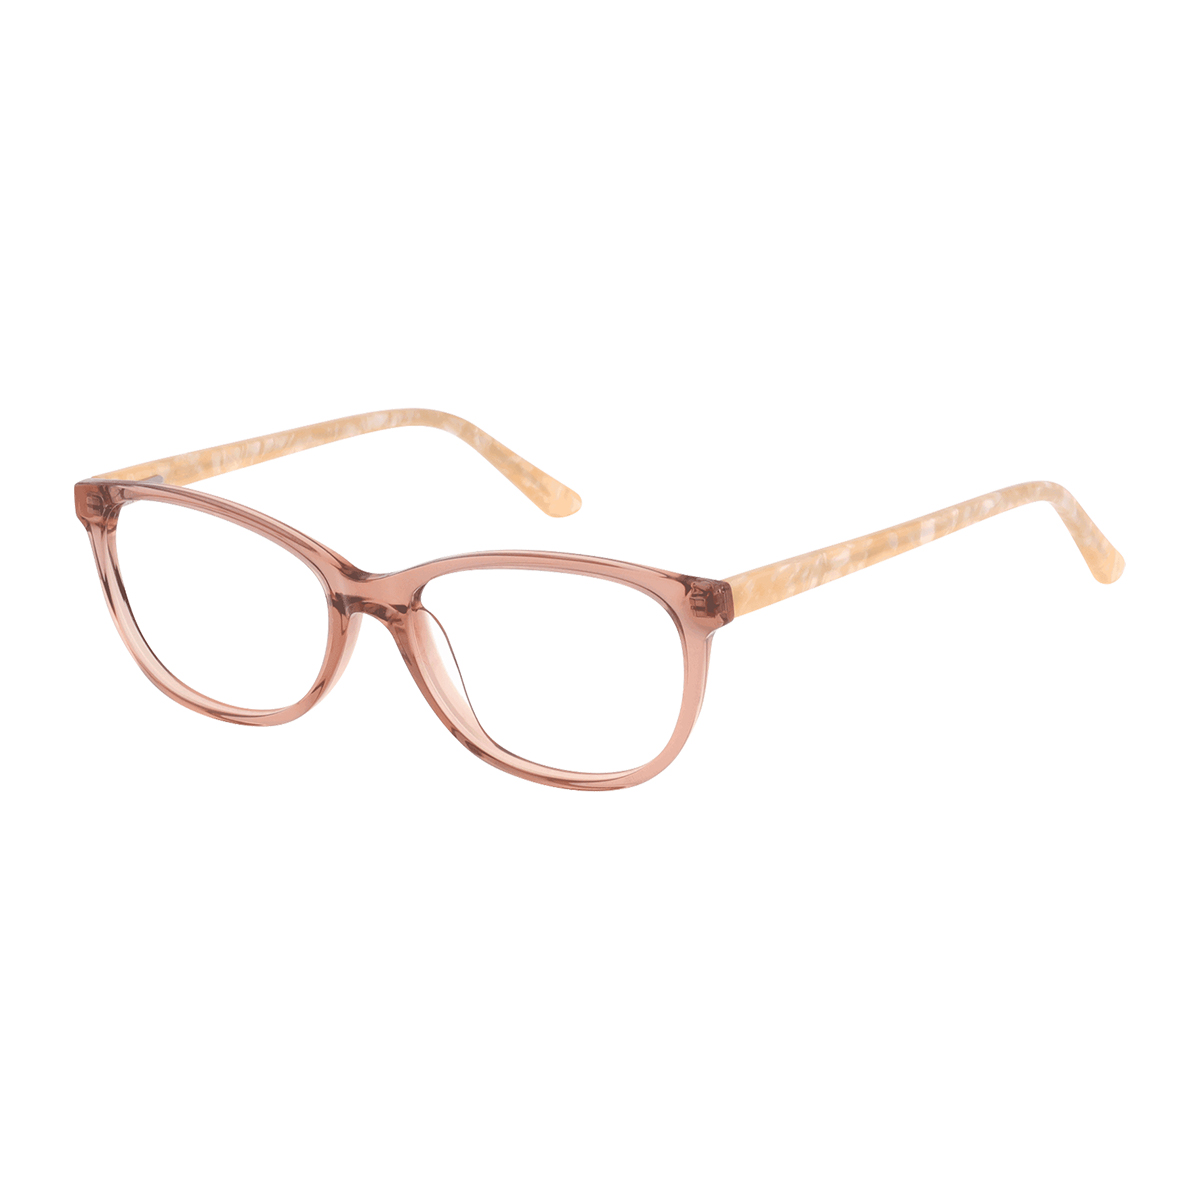 May - Oval Transparent-Orange Reading Glasses for Women